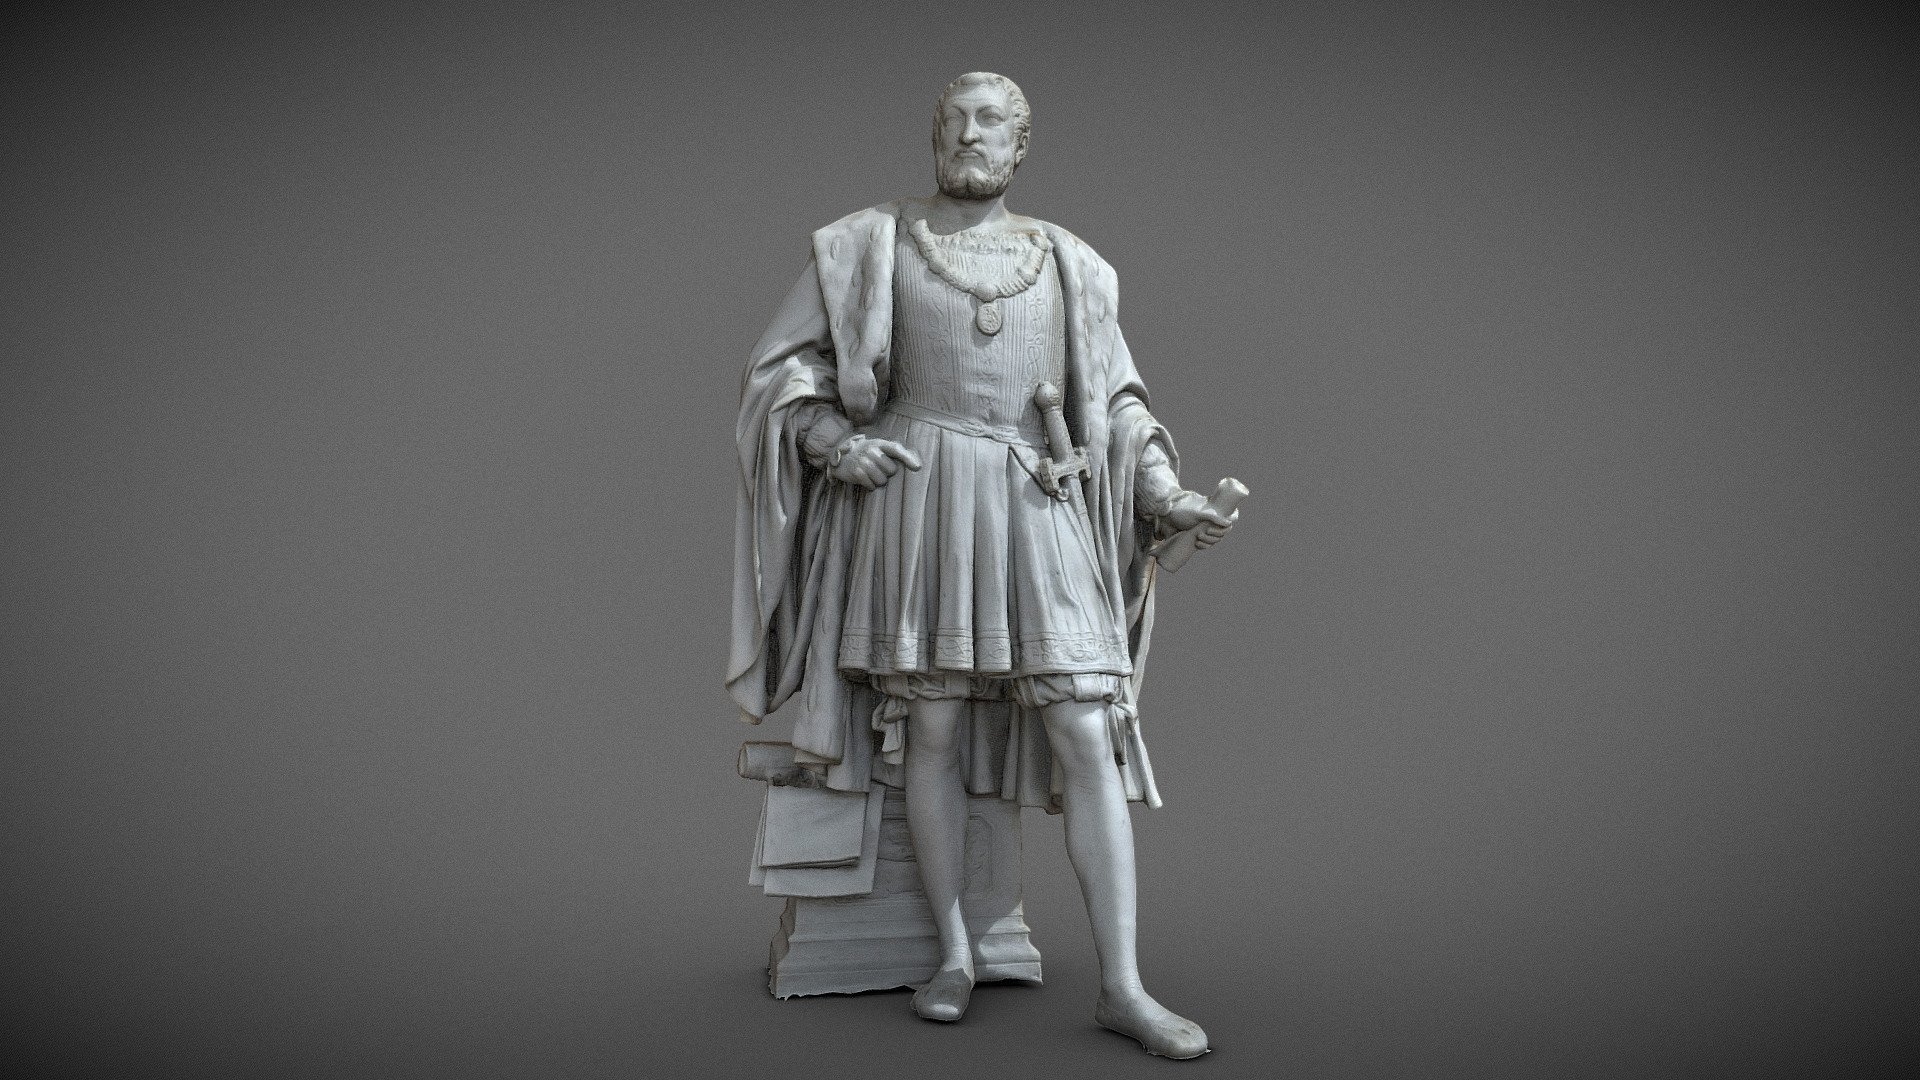 Photogrammetry scan of this Francois 1er statue, quick scan of 140 pic ( not much for a statue ).

François Ier of France (September 12, 1494 – March 31, 1547), called the Father and Restorer of Letters (le Père et Restaurateur des Lettres), was crowned King of France in 1515 in the cathedral at Reims and reigned until 1547.

Francis I is considered to be France's first Renaissance monarch. His reign saw France make immense cultural advances. He was a contemporary of King Henry VIII of England and of Holy Roman Emperor Charles V, his great rivals, and Suleiman the Magnificent, his ally.

source : Wally Gobetz flickr

You can find this statue in Chateau de Versailles, in the France History Gallery 3d model